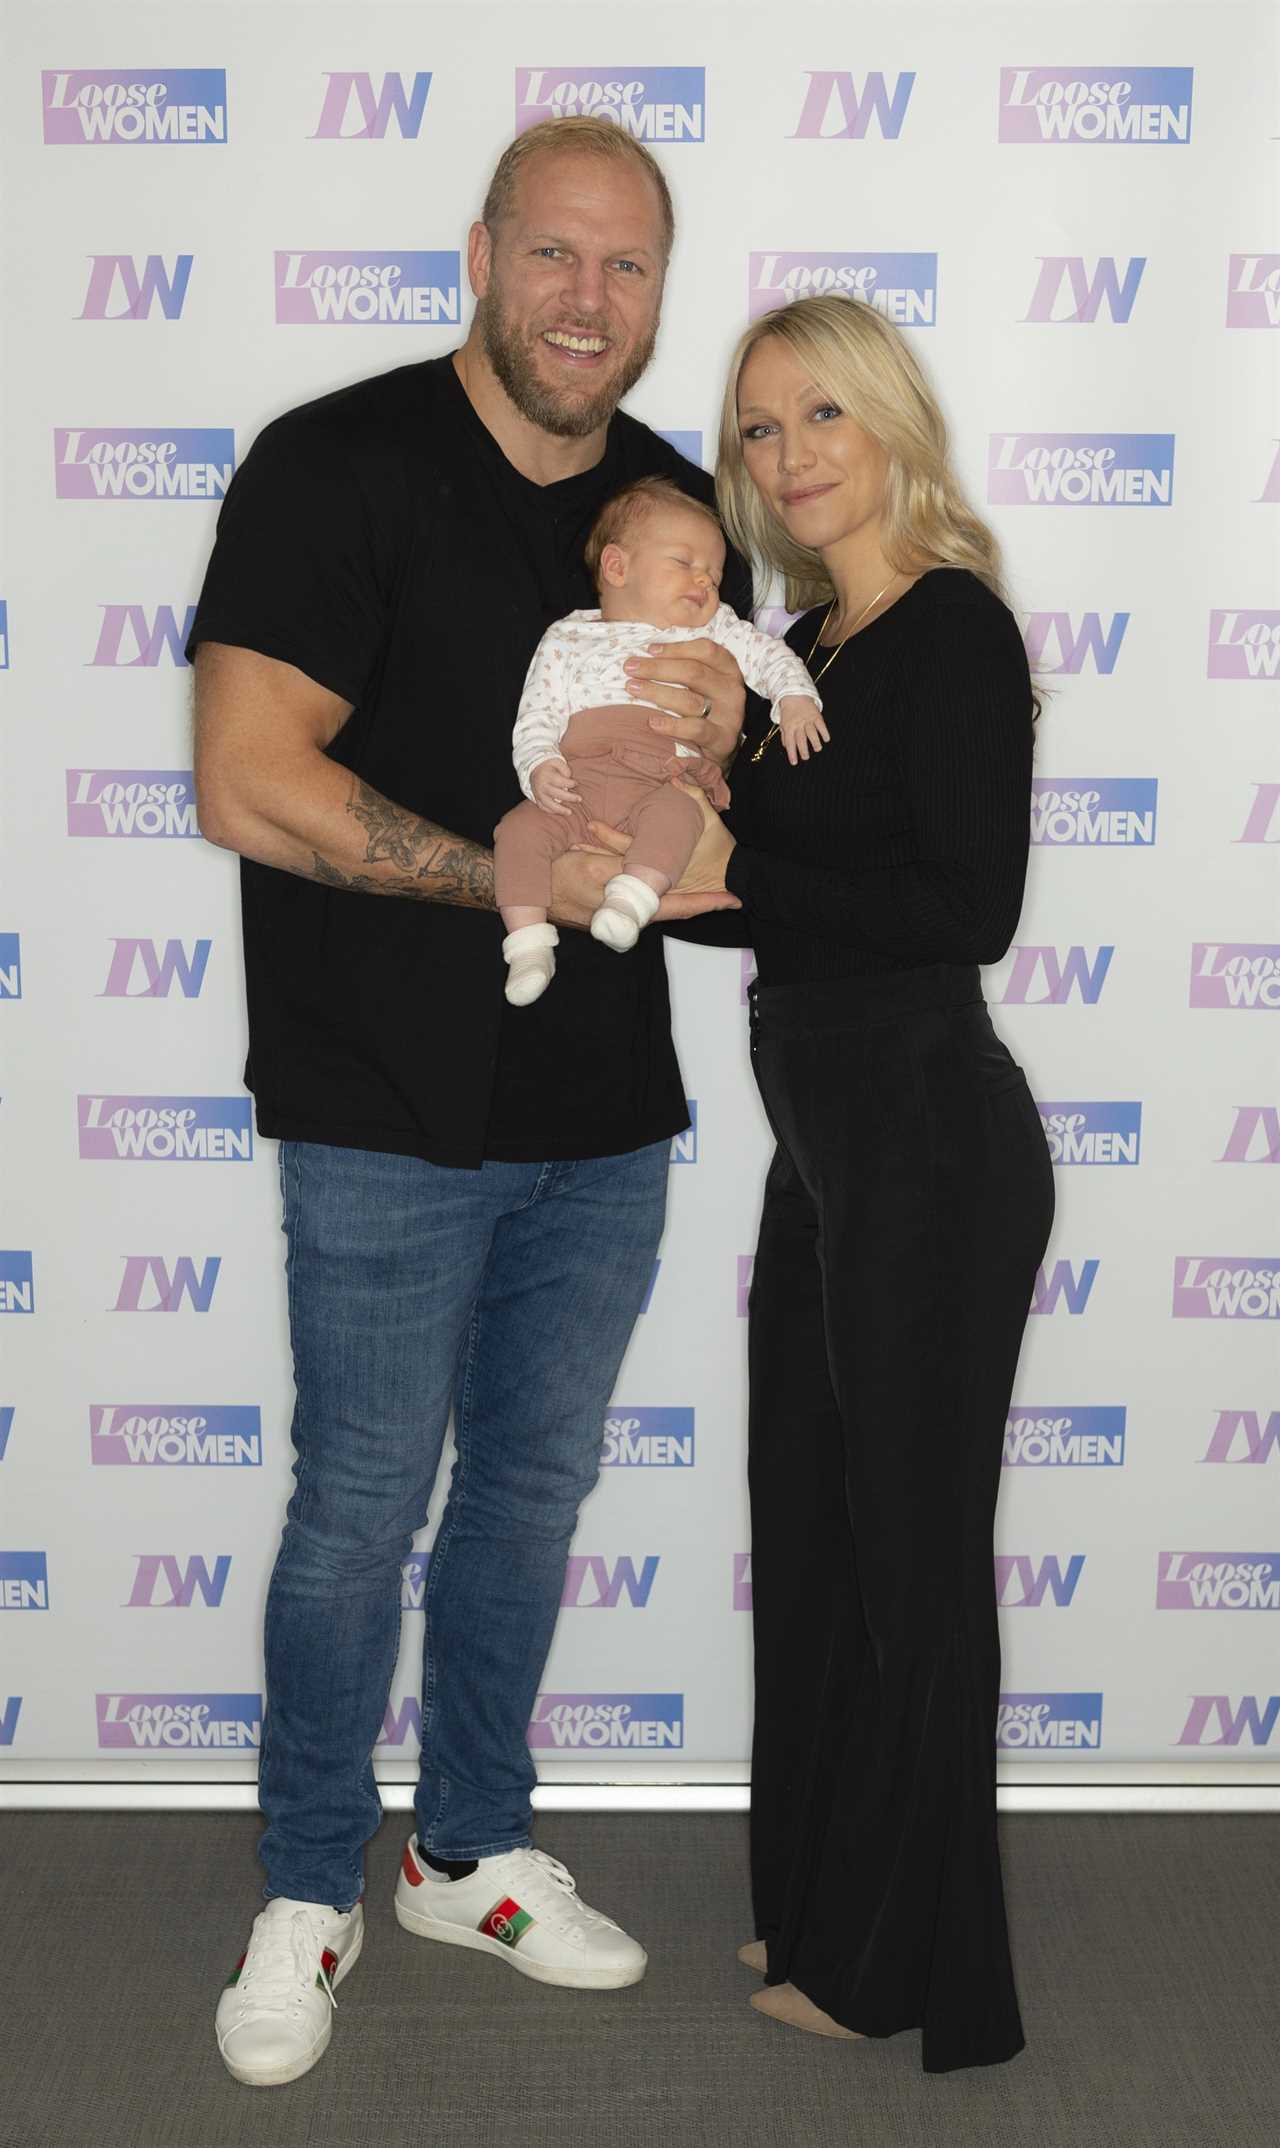 Chloe Madeley reveals she had to go back to work EIGHT weeks after giving birth because she ‘needs the money’